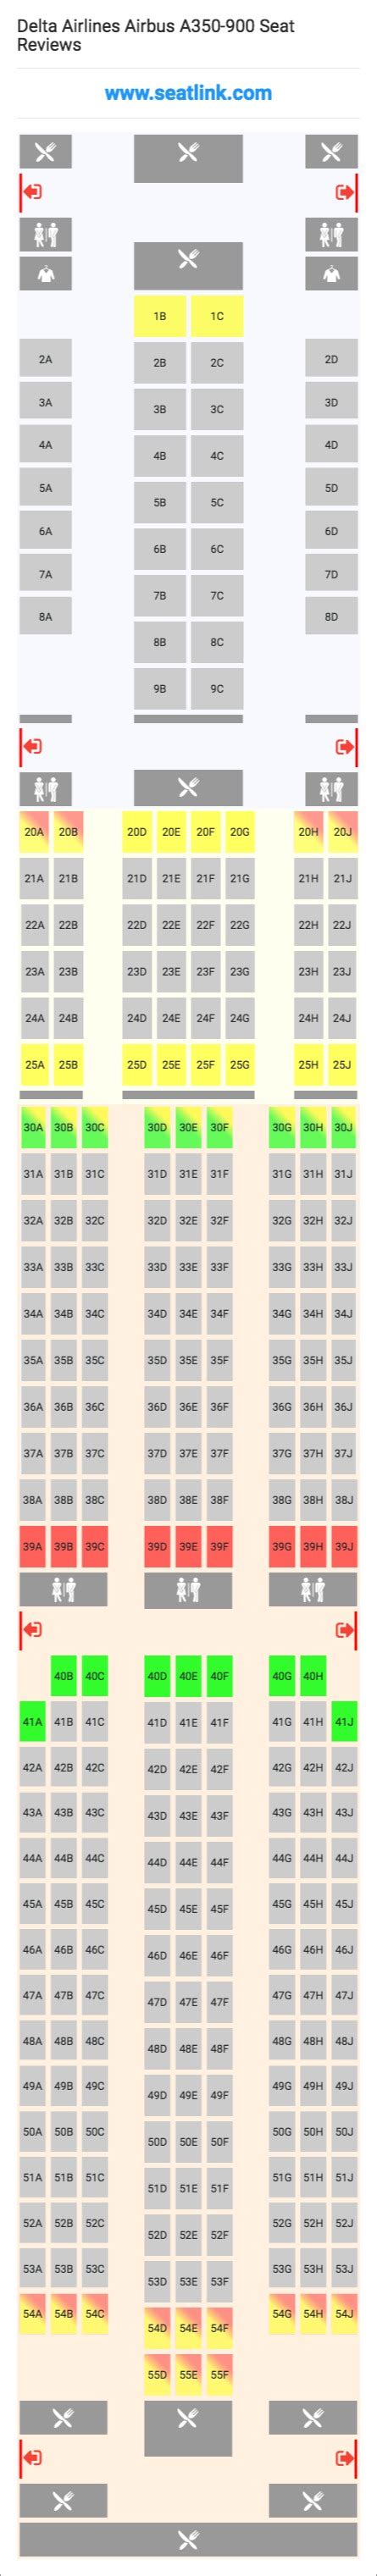 Business, premium economy and economy. Delta Airlines Airbus A350-900 (359) Seat Map | Delta ...